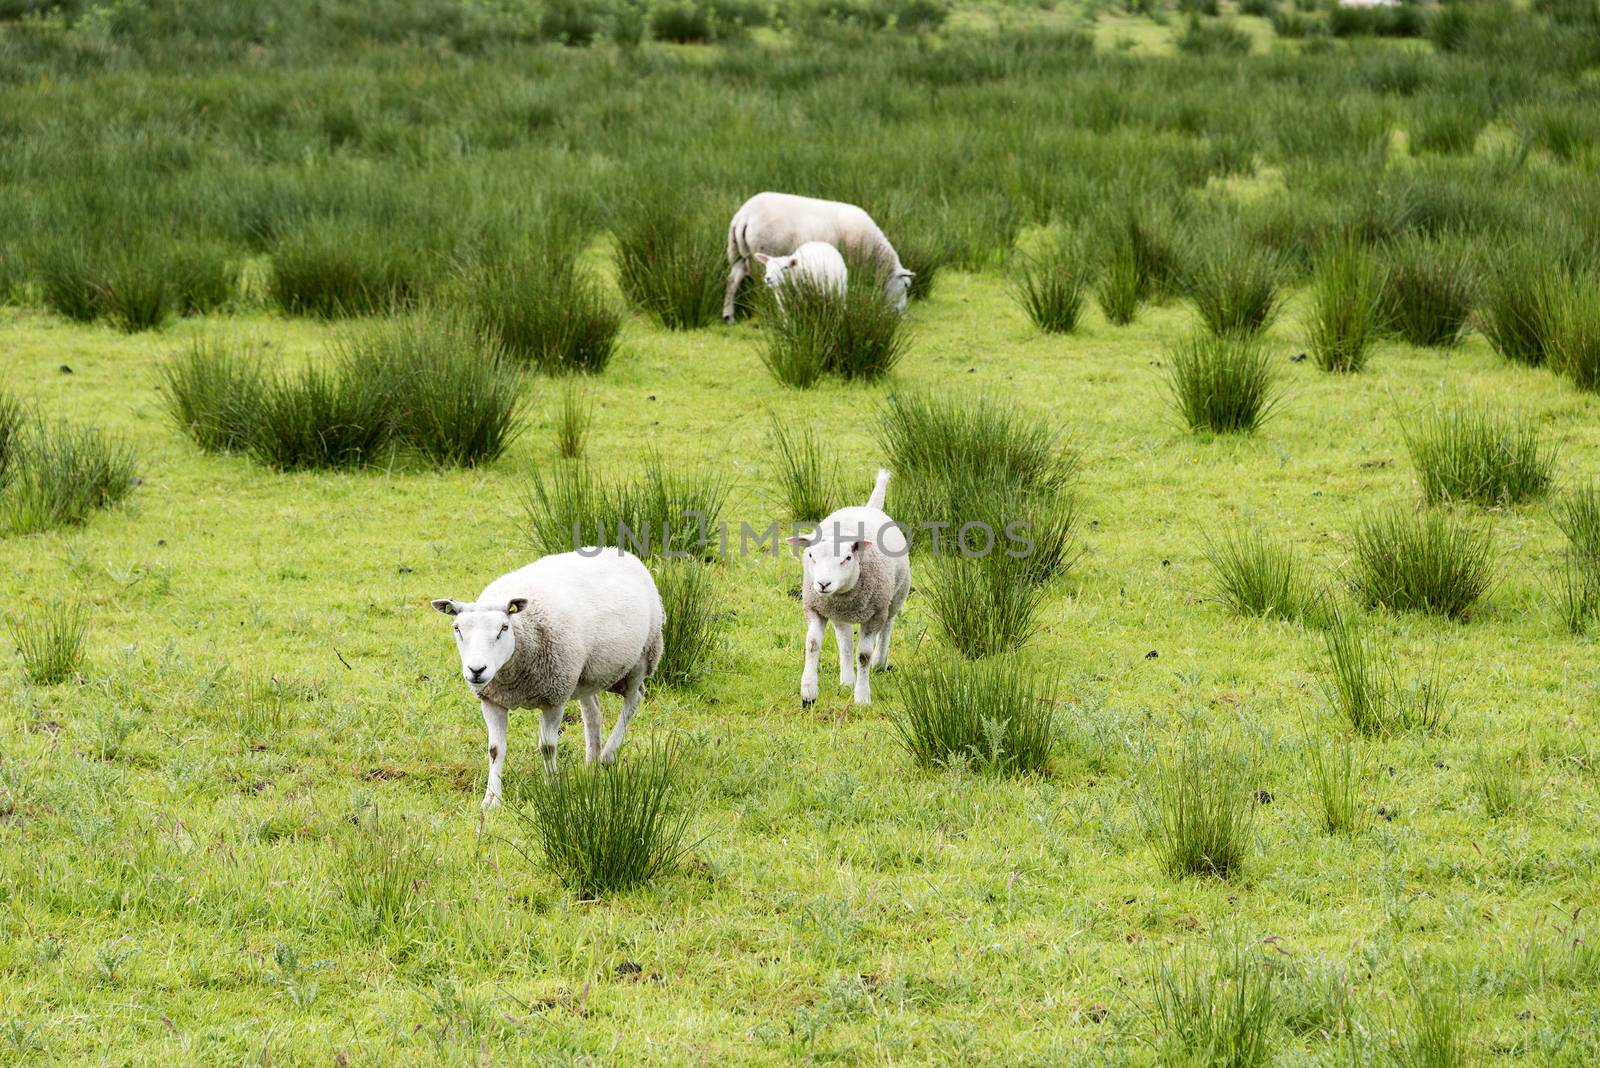 sheep grazing on field with green grass